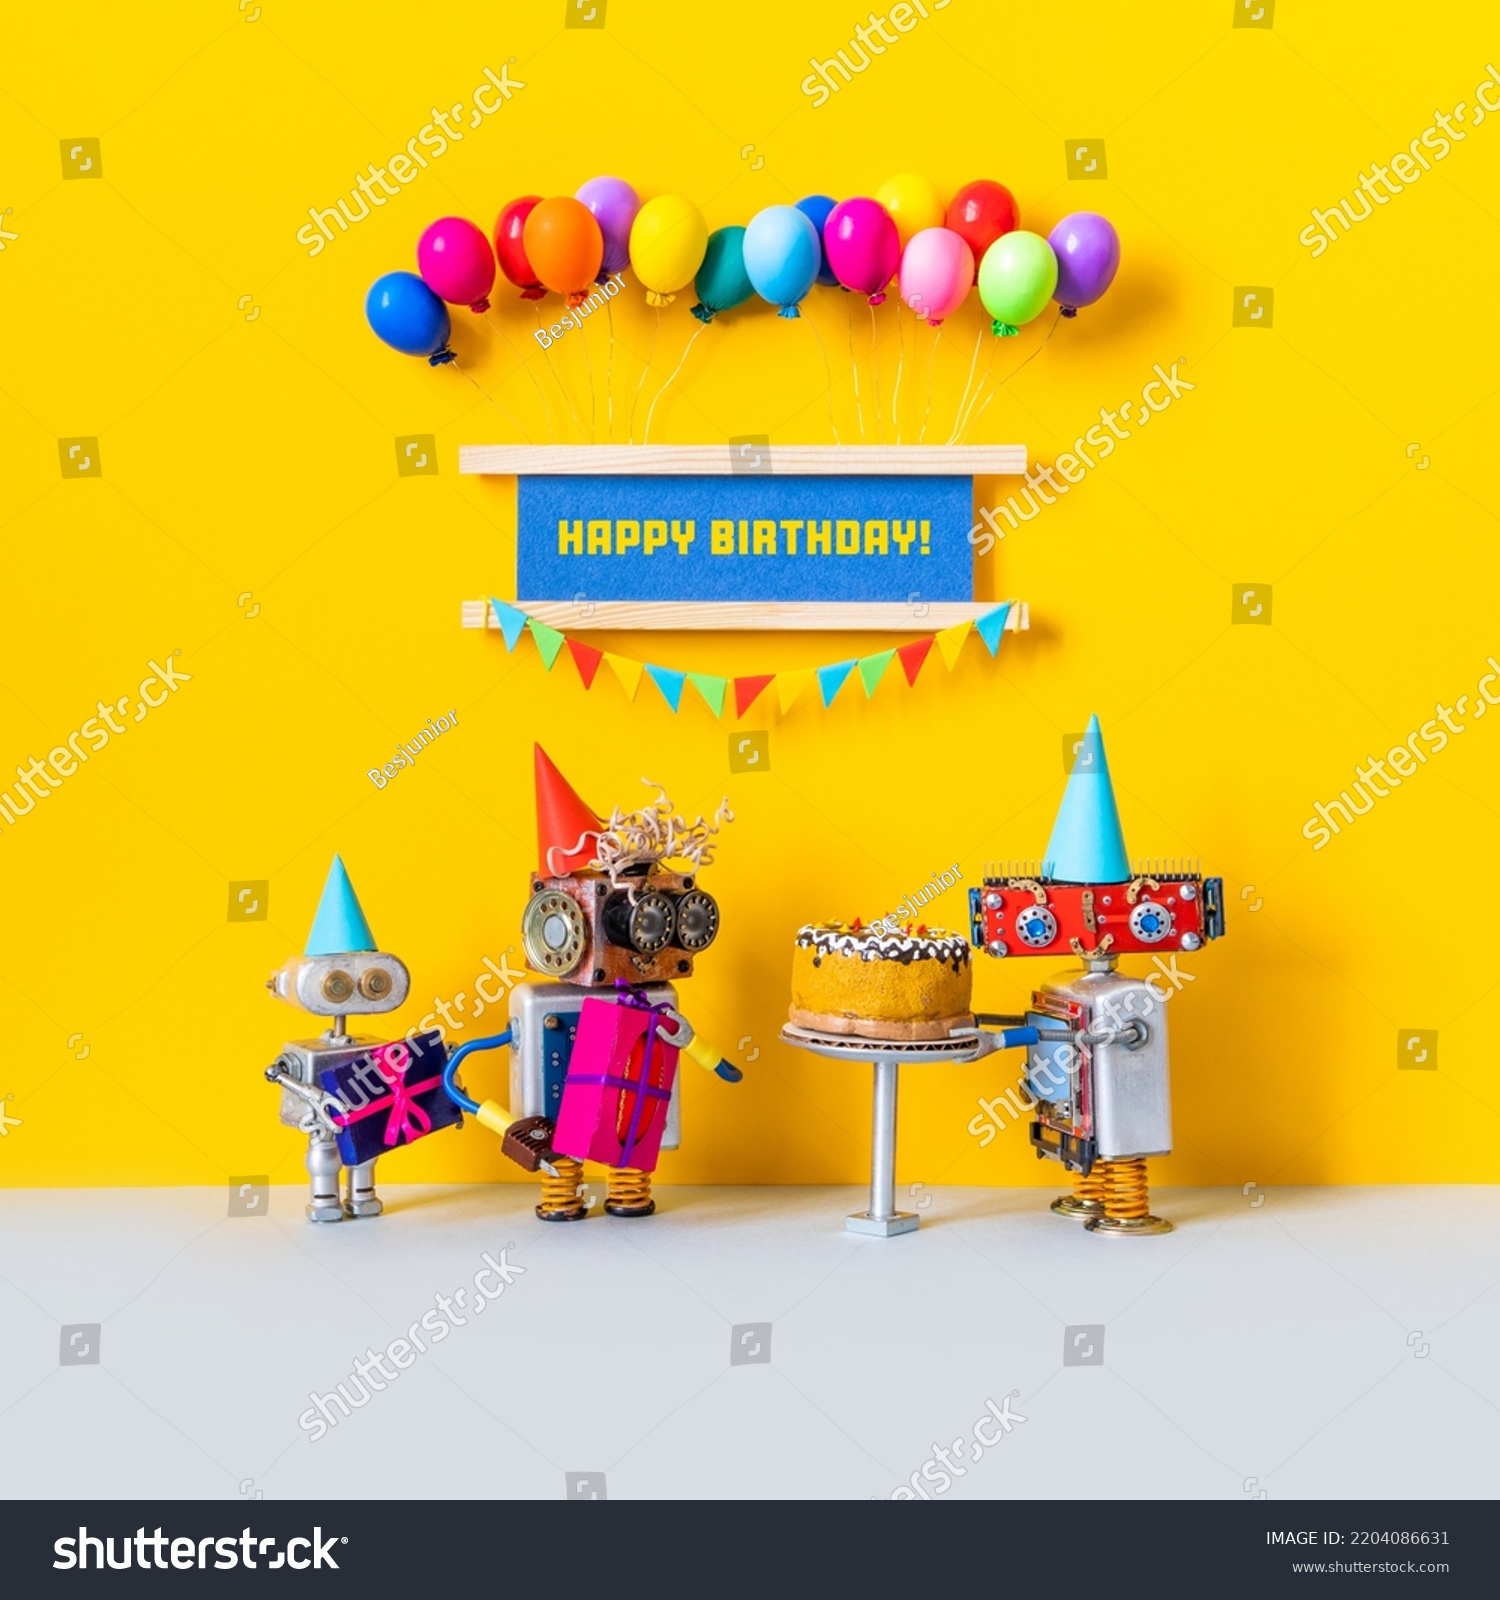 Funny holiday poster. Happy birthday congratulation greeting card. Toy robot holding a birthday cake, festive banner decorated with balloons, garland of flags #2204086631